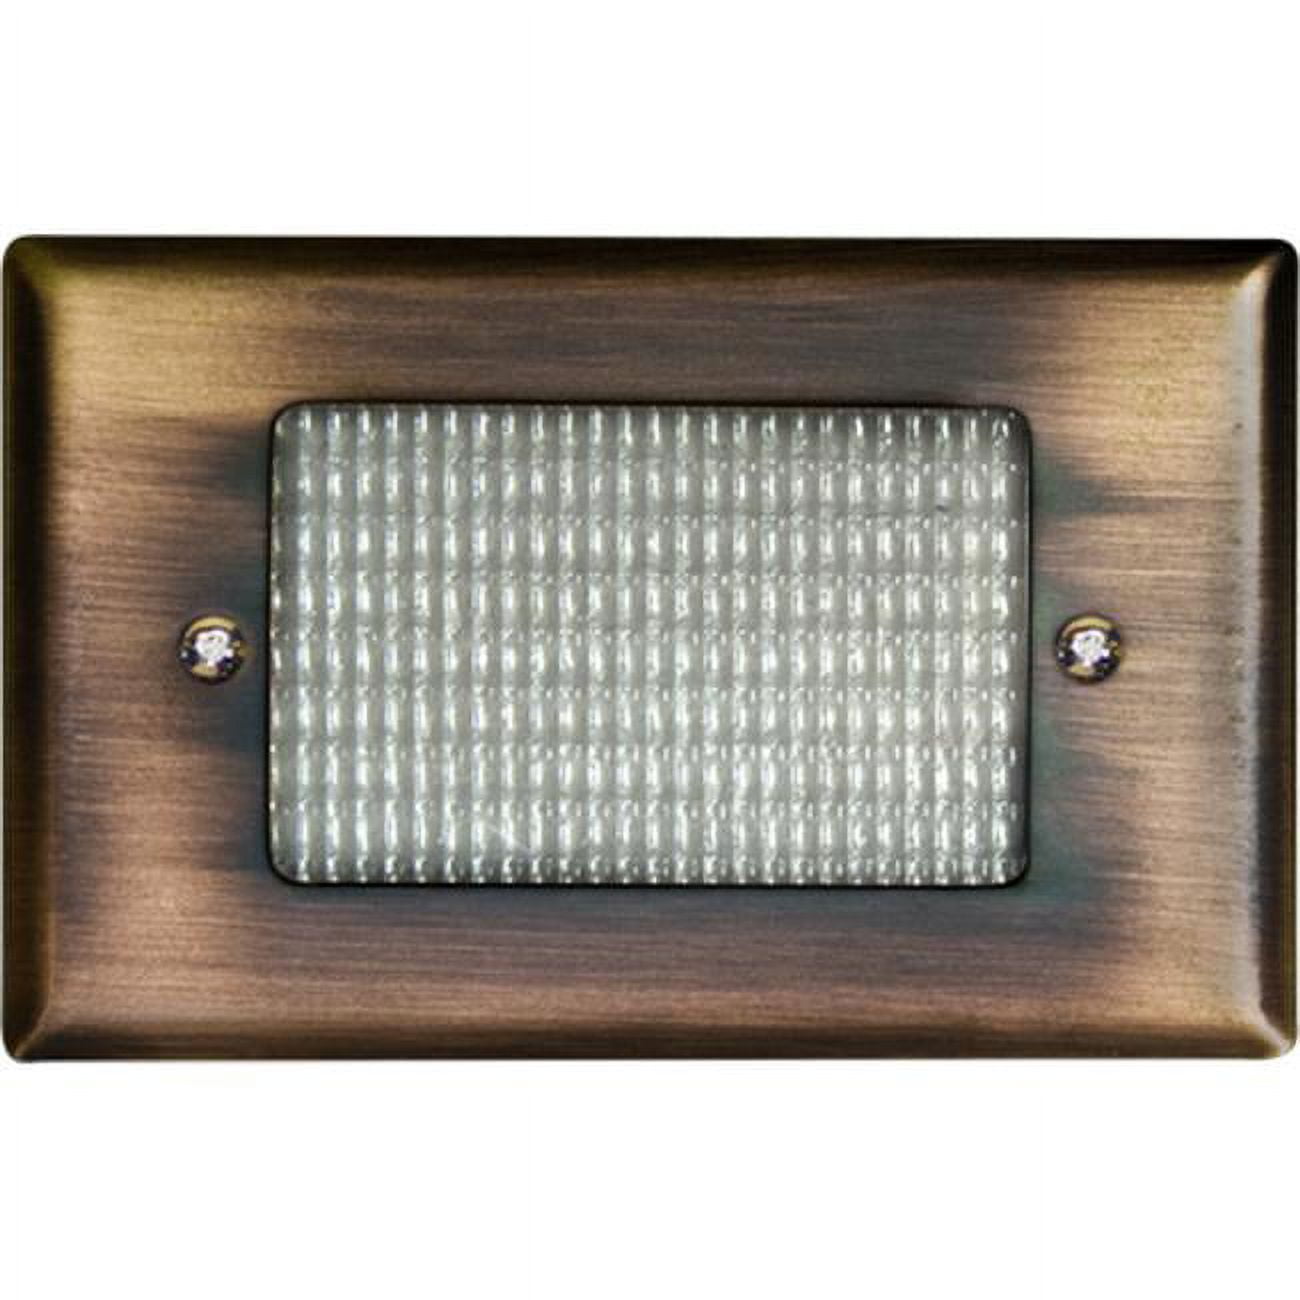 Picture of Dabmar Lighting LV618-ABZ Brass Recessed Open Face Brick, Step & Wall Light, Antique Bronze - 1.95 x 4.83 x 3.10 in.